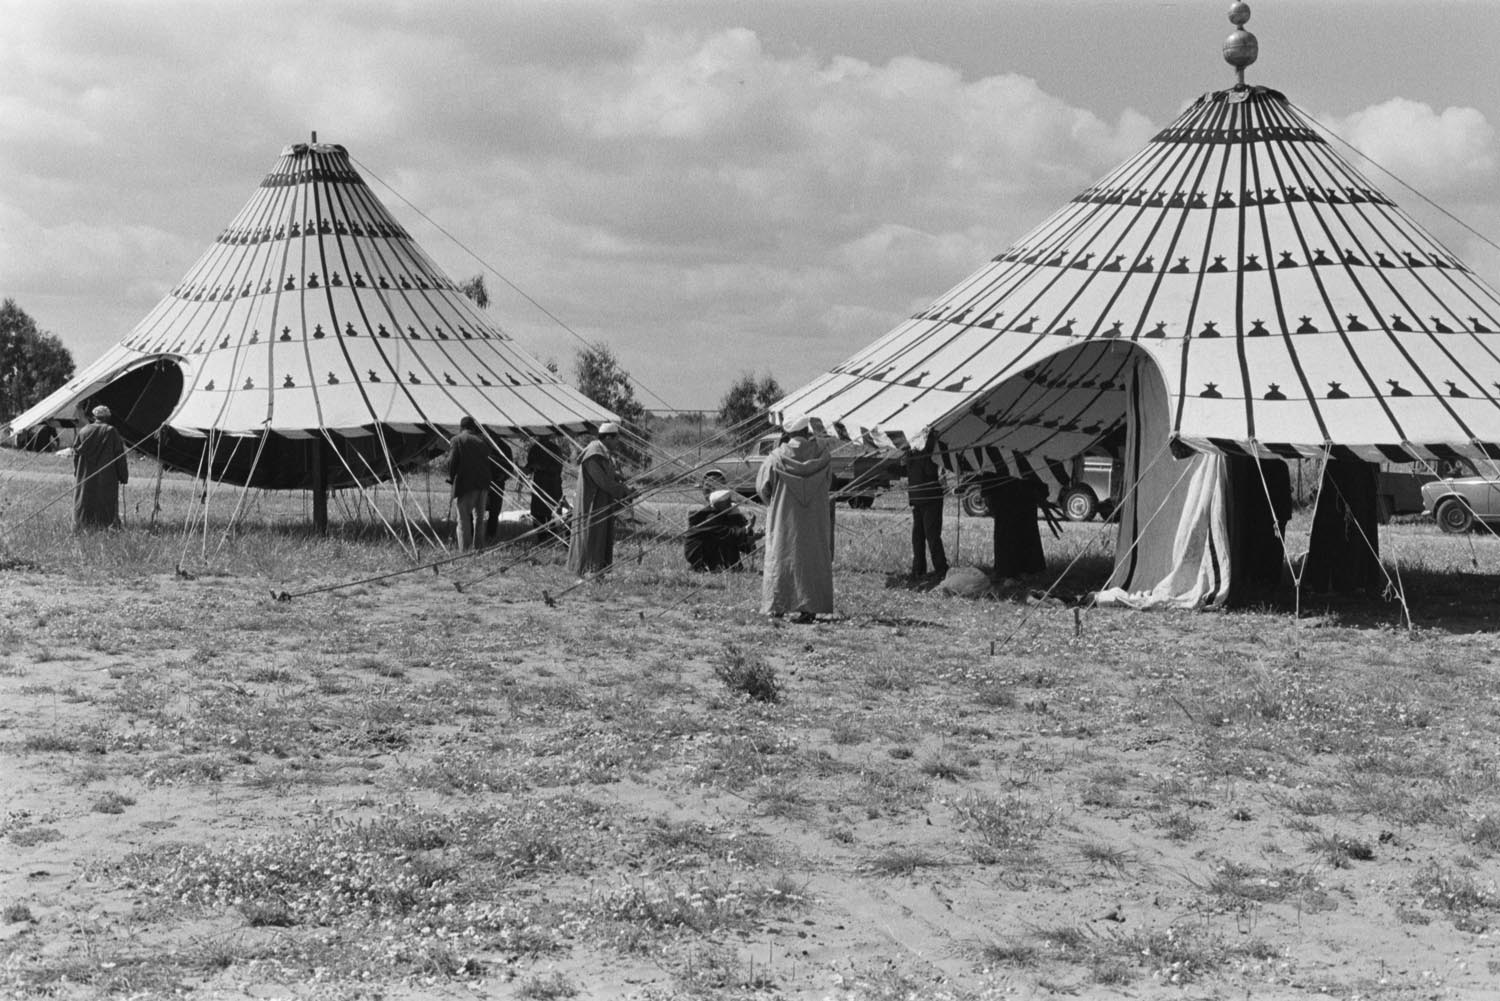 A group of men in traditional clothing setting up two celebration tents